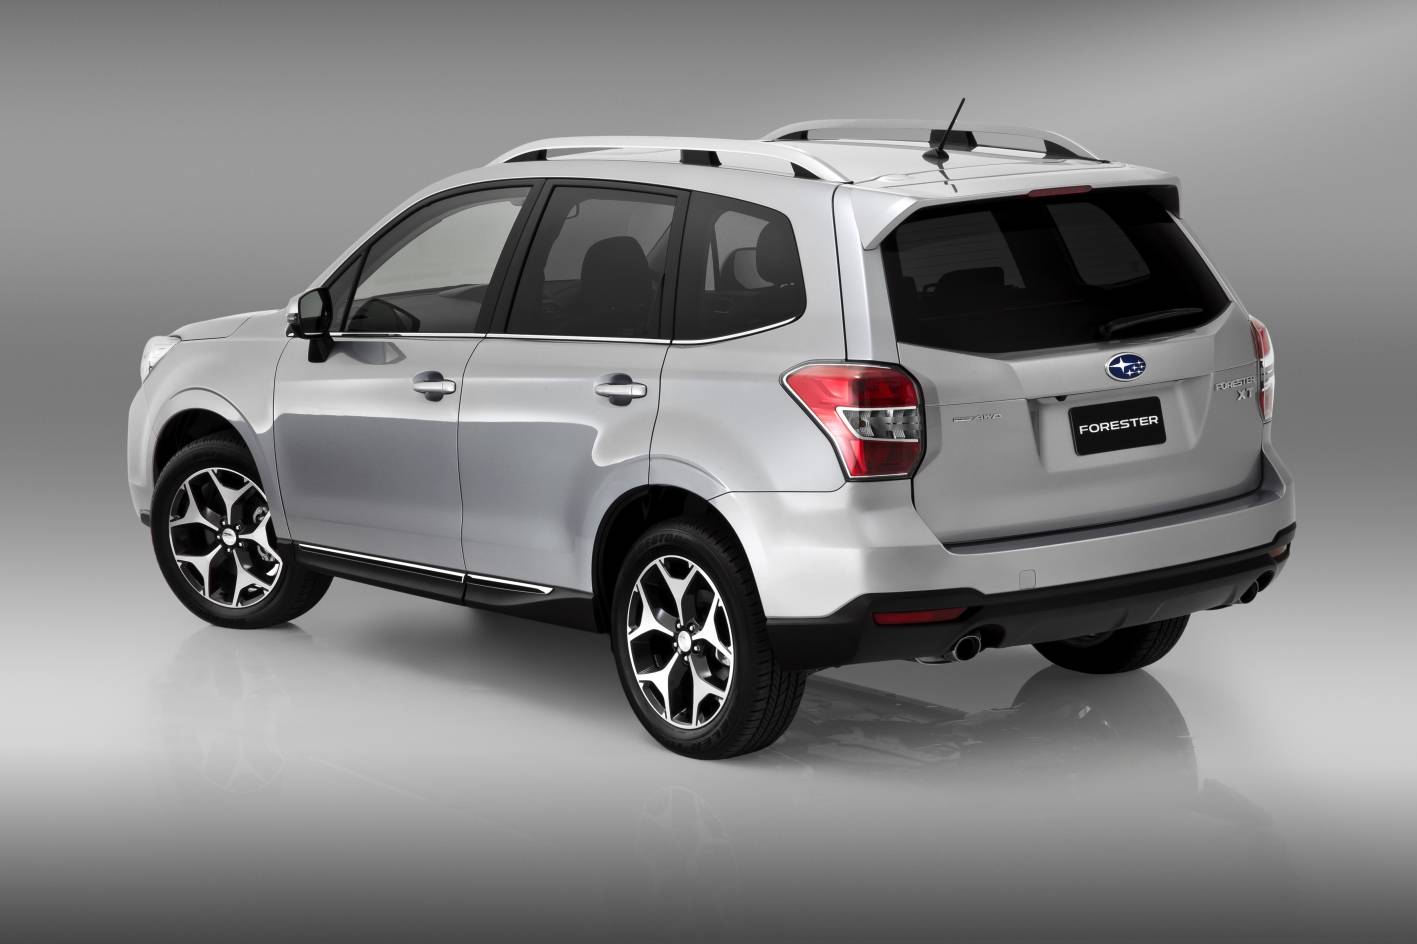 Subaru Cars News 2013 Forester XT on sale from 43,490